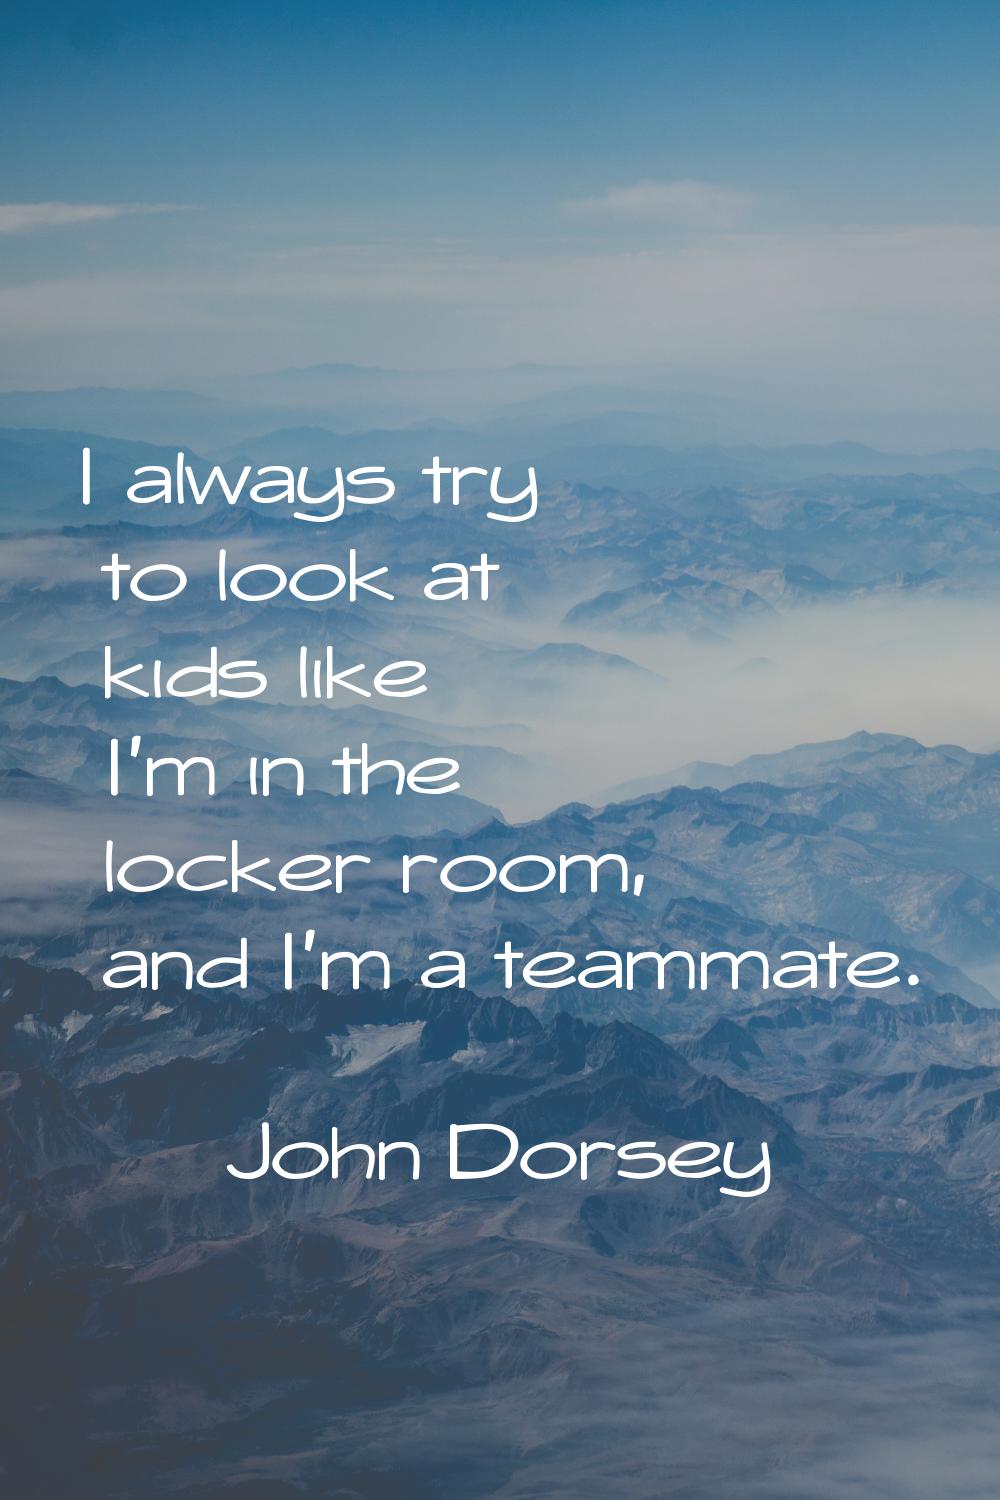 I always try to look at kids like I'm in the locker room, and I'm a teammate.